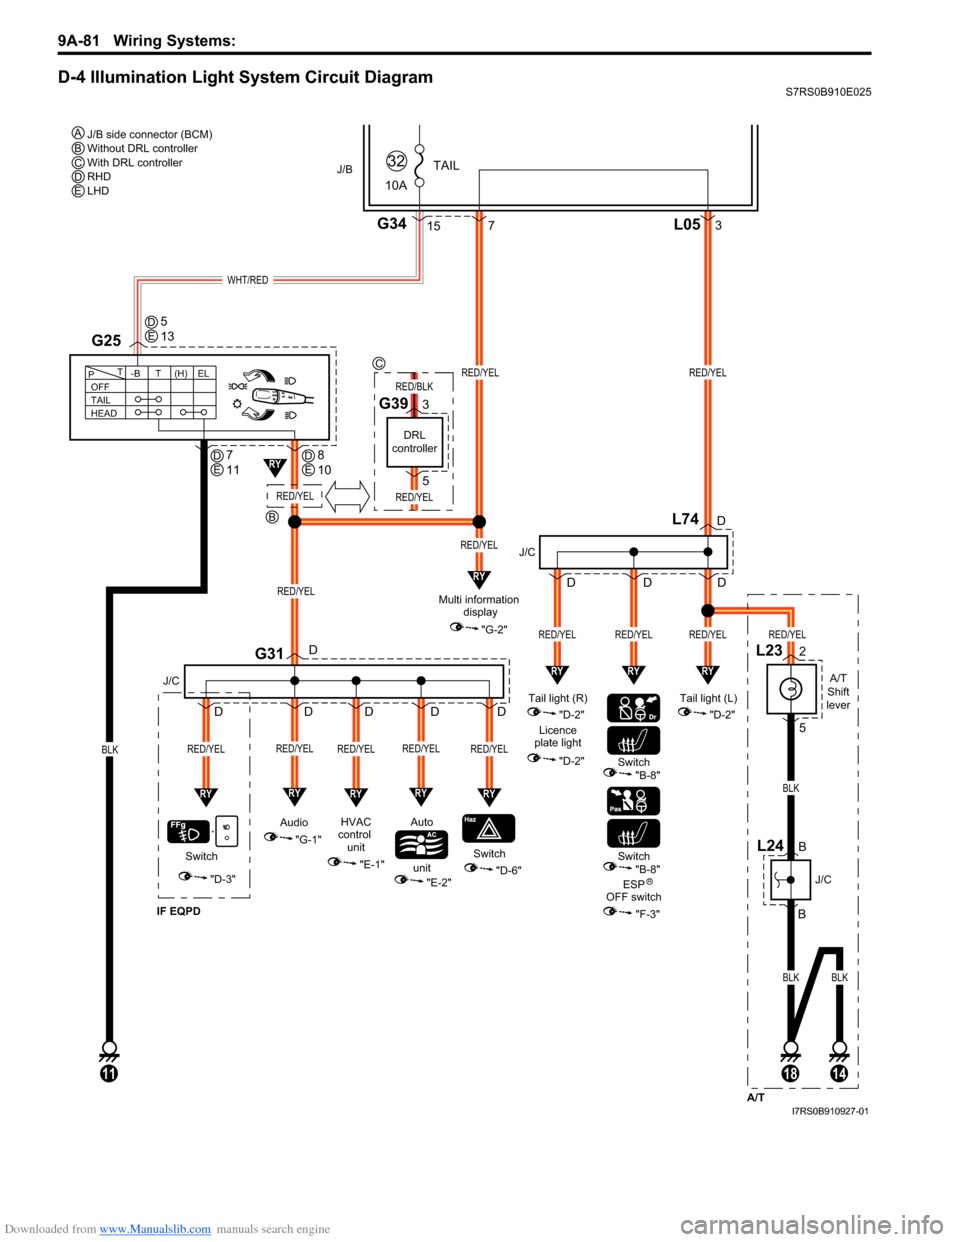 SUZUKI SWIFT 2004 2.G Service Workshop Manual Downloaded from www.Manualslib.com manuals search engine 9A-81 Wiring Systems: 
D-4 Illumination Light System Circuit DiagramS7RS0B910E025
WHT/RED
A/T
Shift
lever
L23
L742
5
BLK
BLKBLK
10A
TAIL
32J/B
